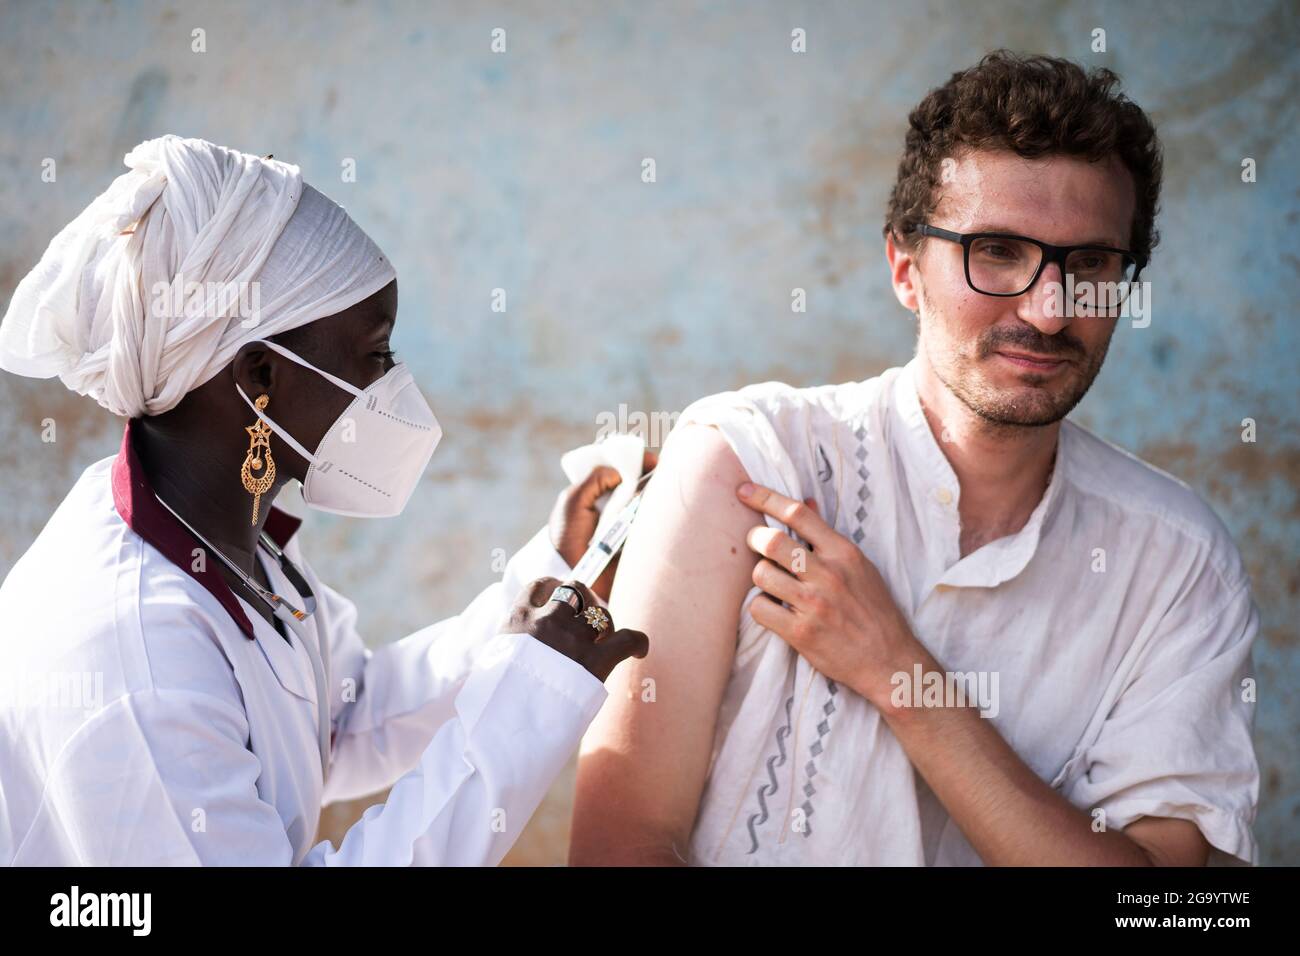 In this image, a young caucasian adult with a tense expression on his face is injected a vaccine shot in his right arm from a black nurse wearing a fa Stock Photo